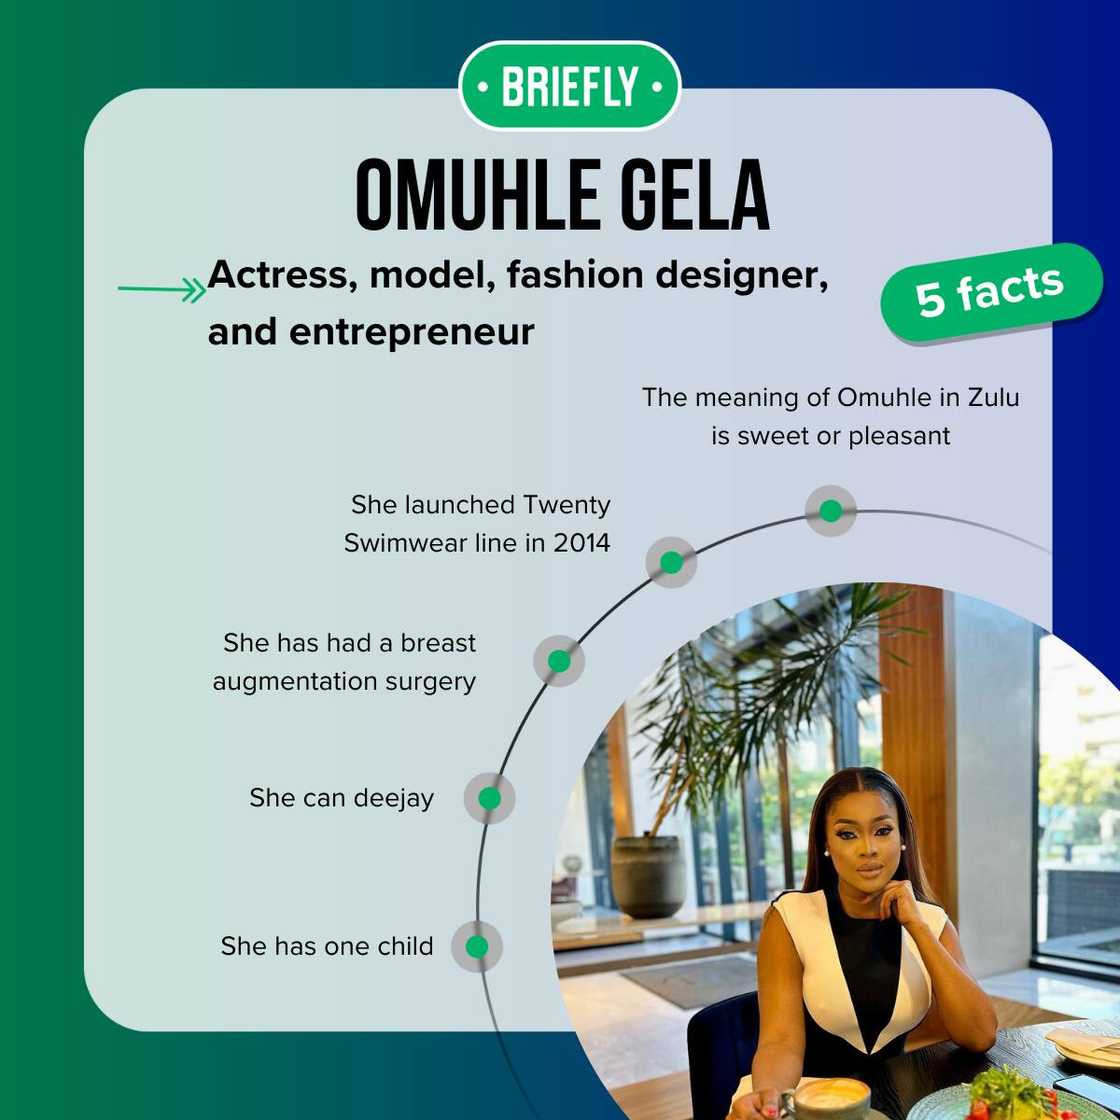 Top-5 facts about Omuhle Gela